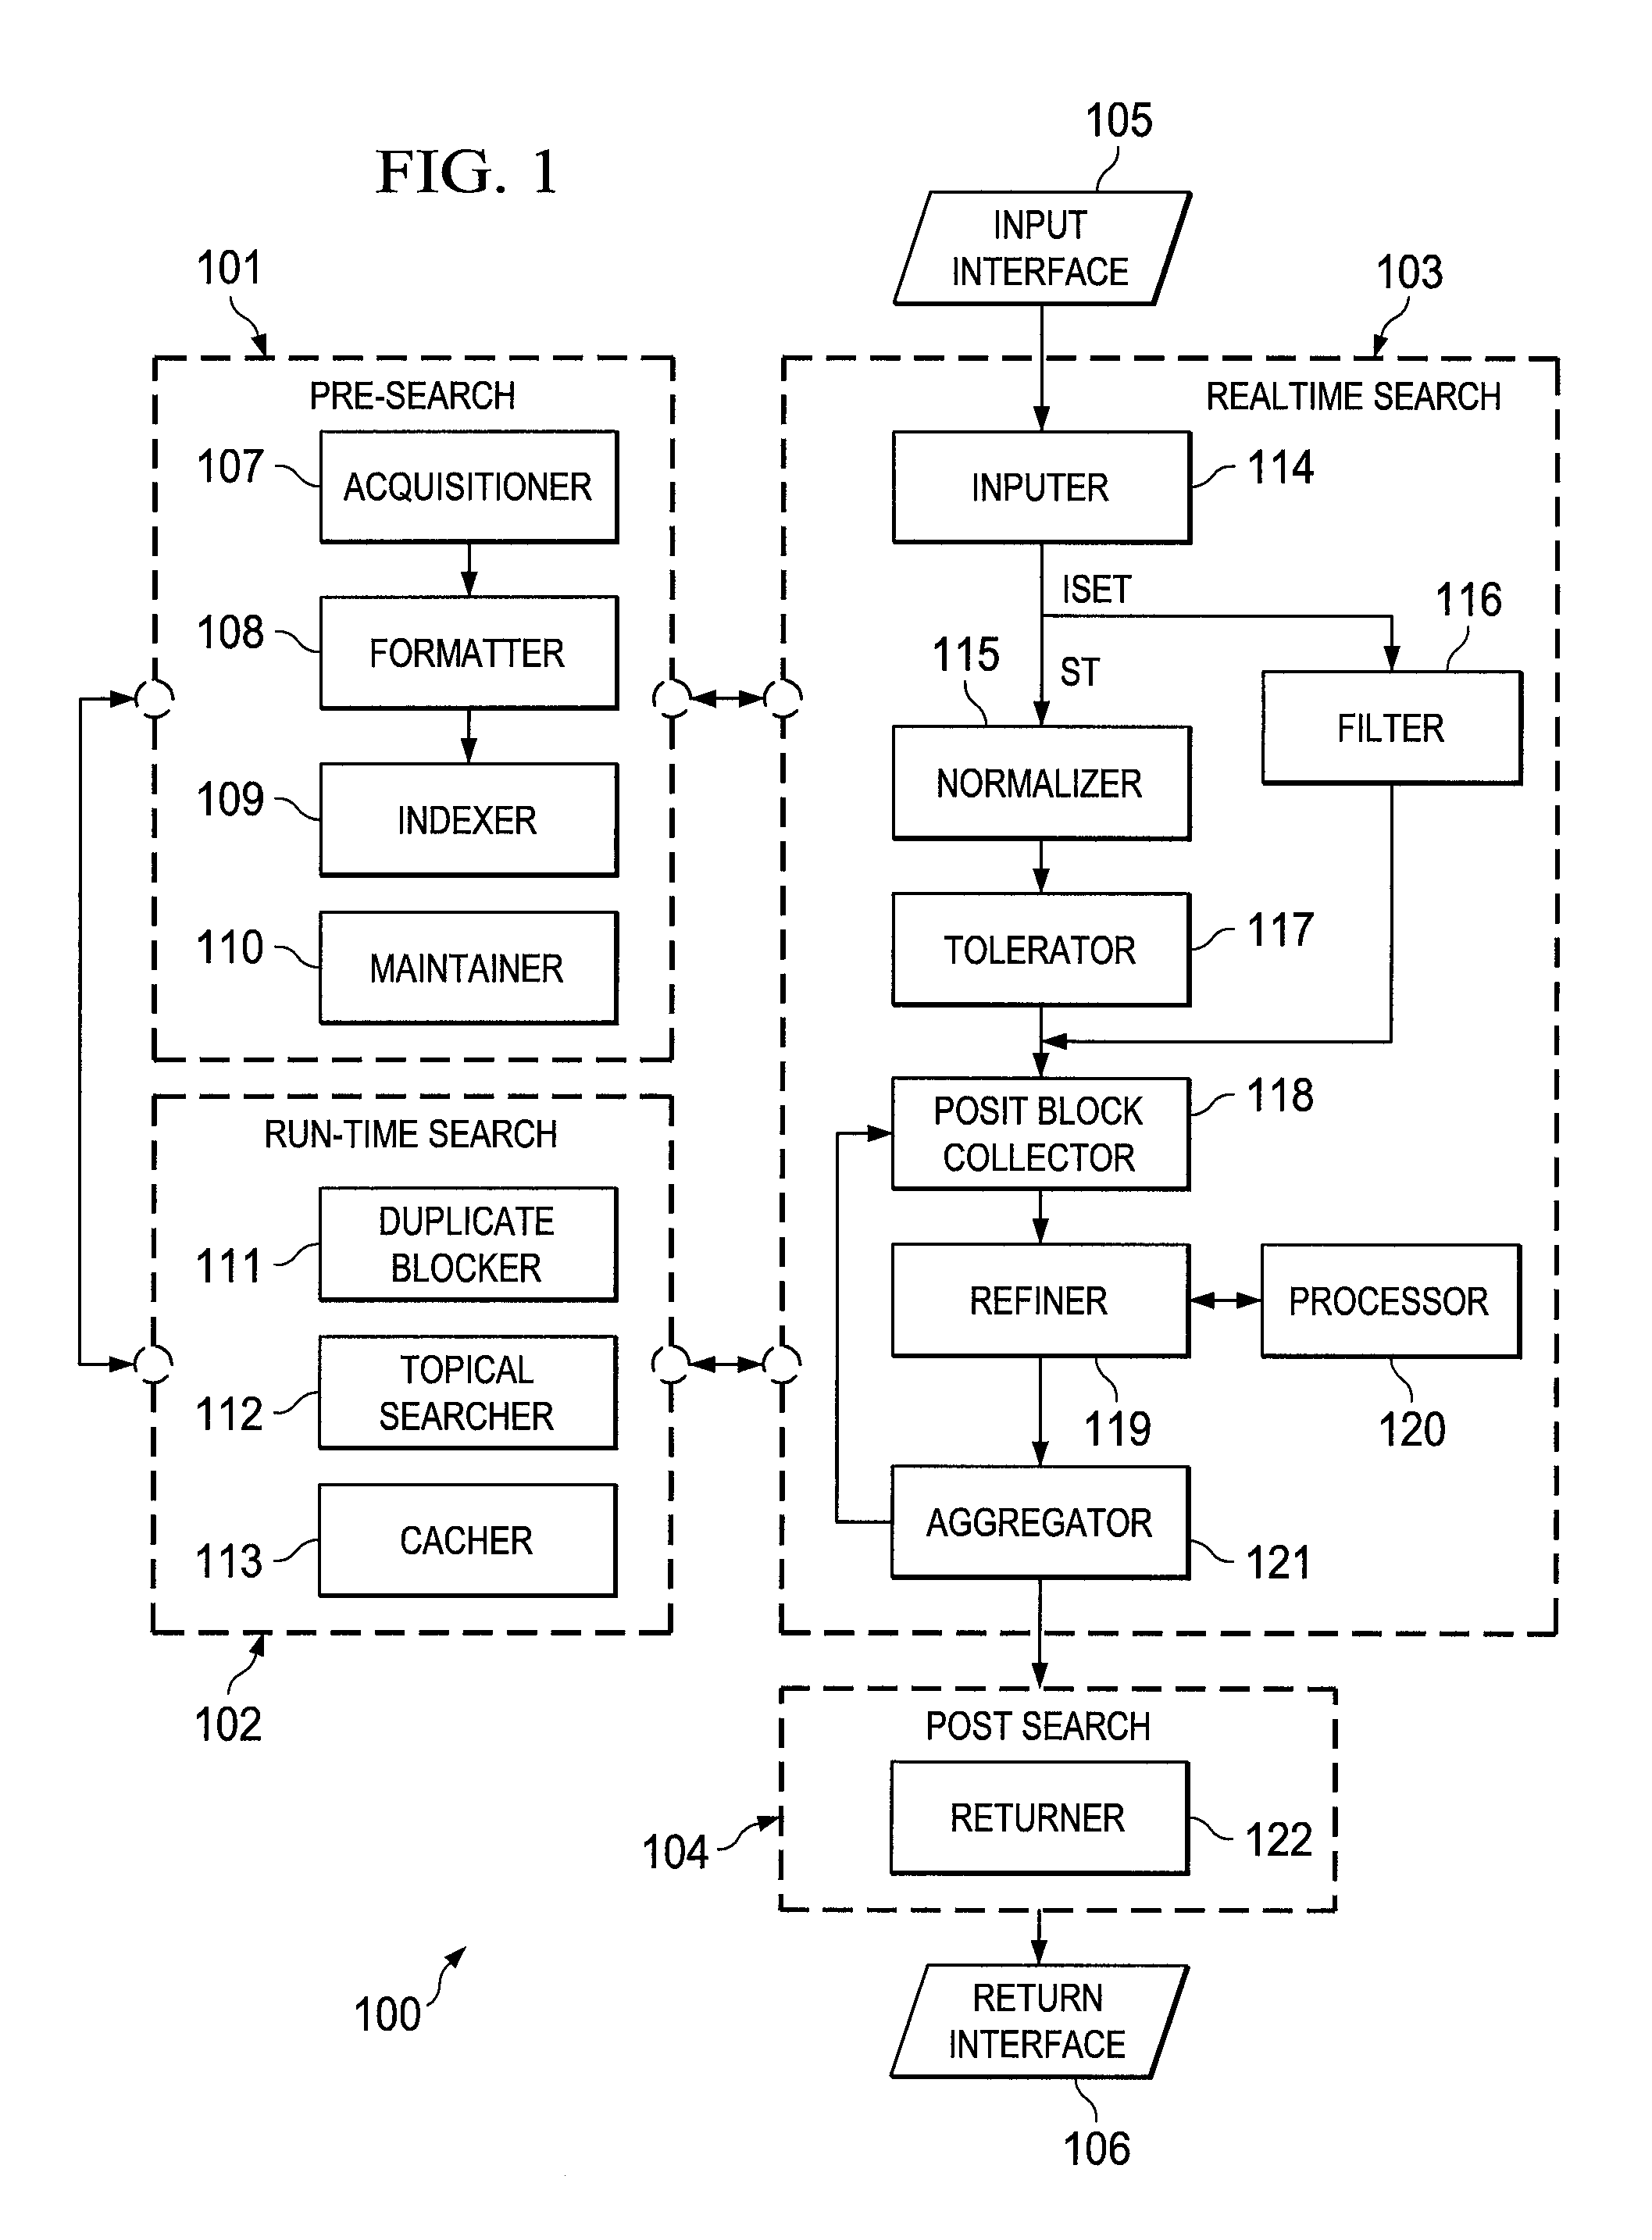 Systems and methods for indexing information for a search engine